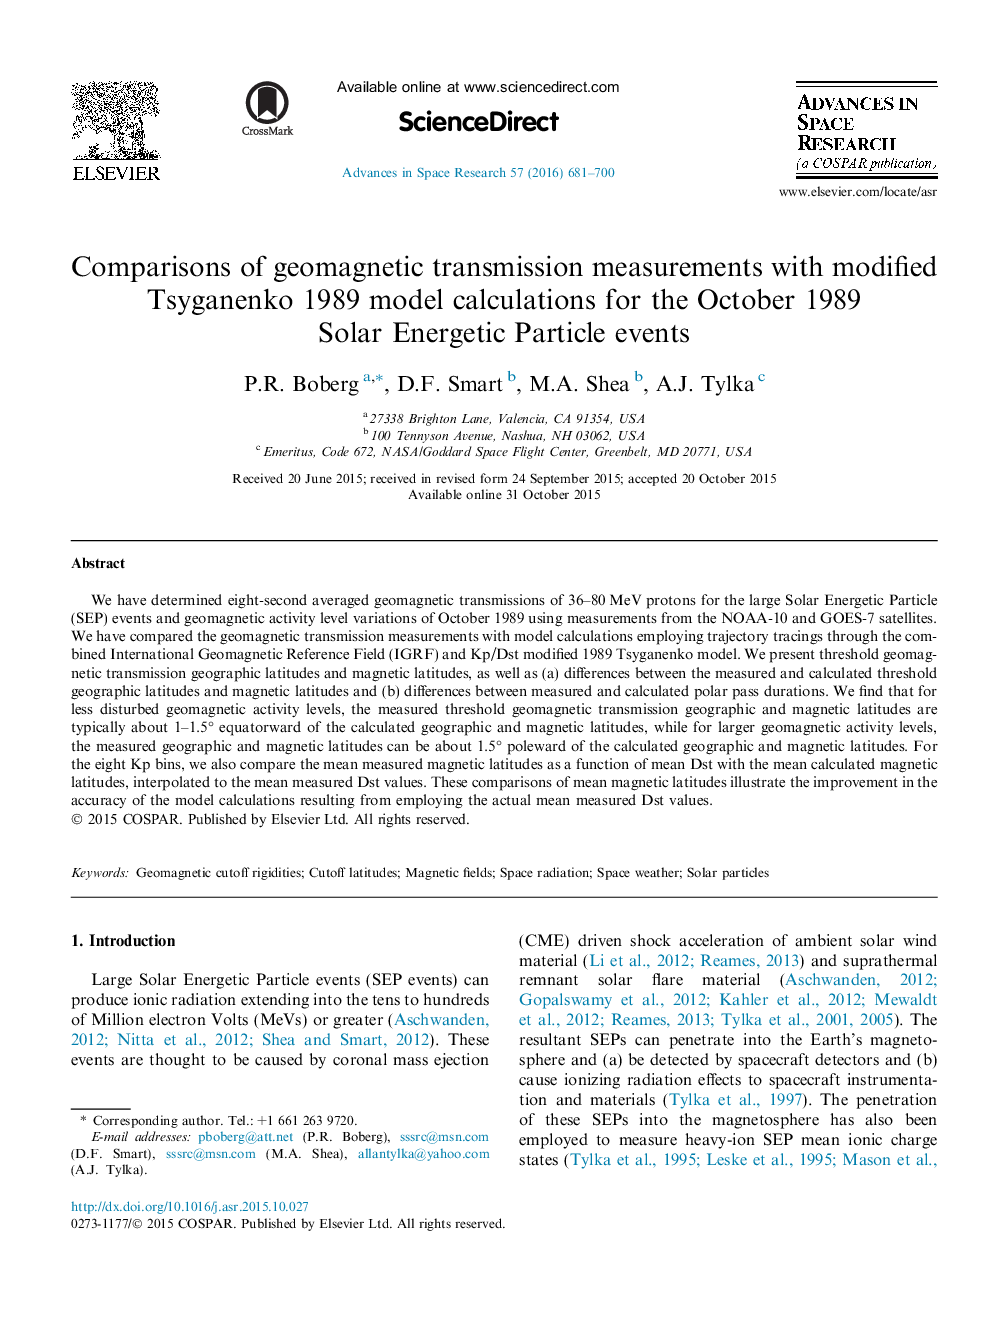 Comparisons of geomagnetic transmission measurements with modified Tsyganenko 1989 model calculations for the October 1989 Solar Energetic Particle events